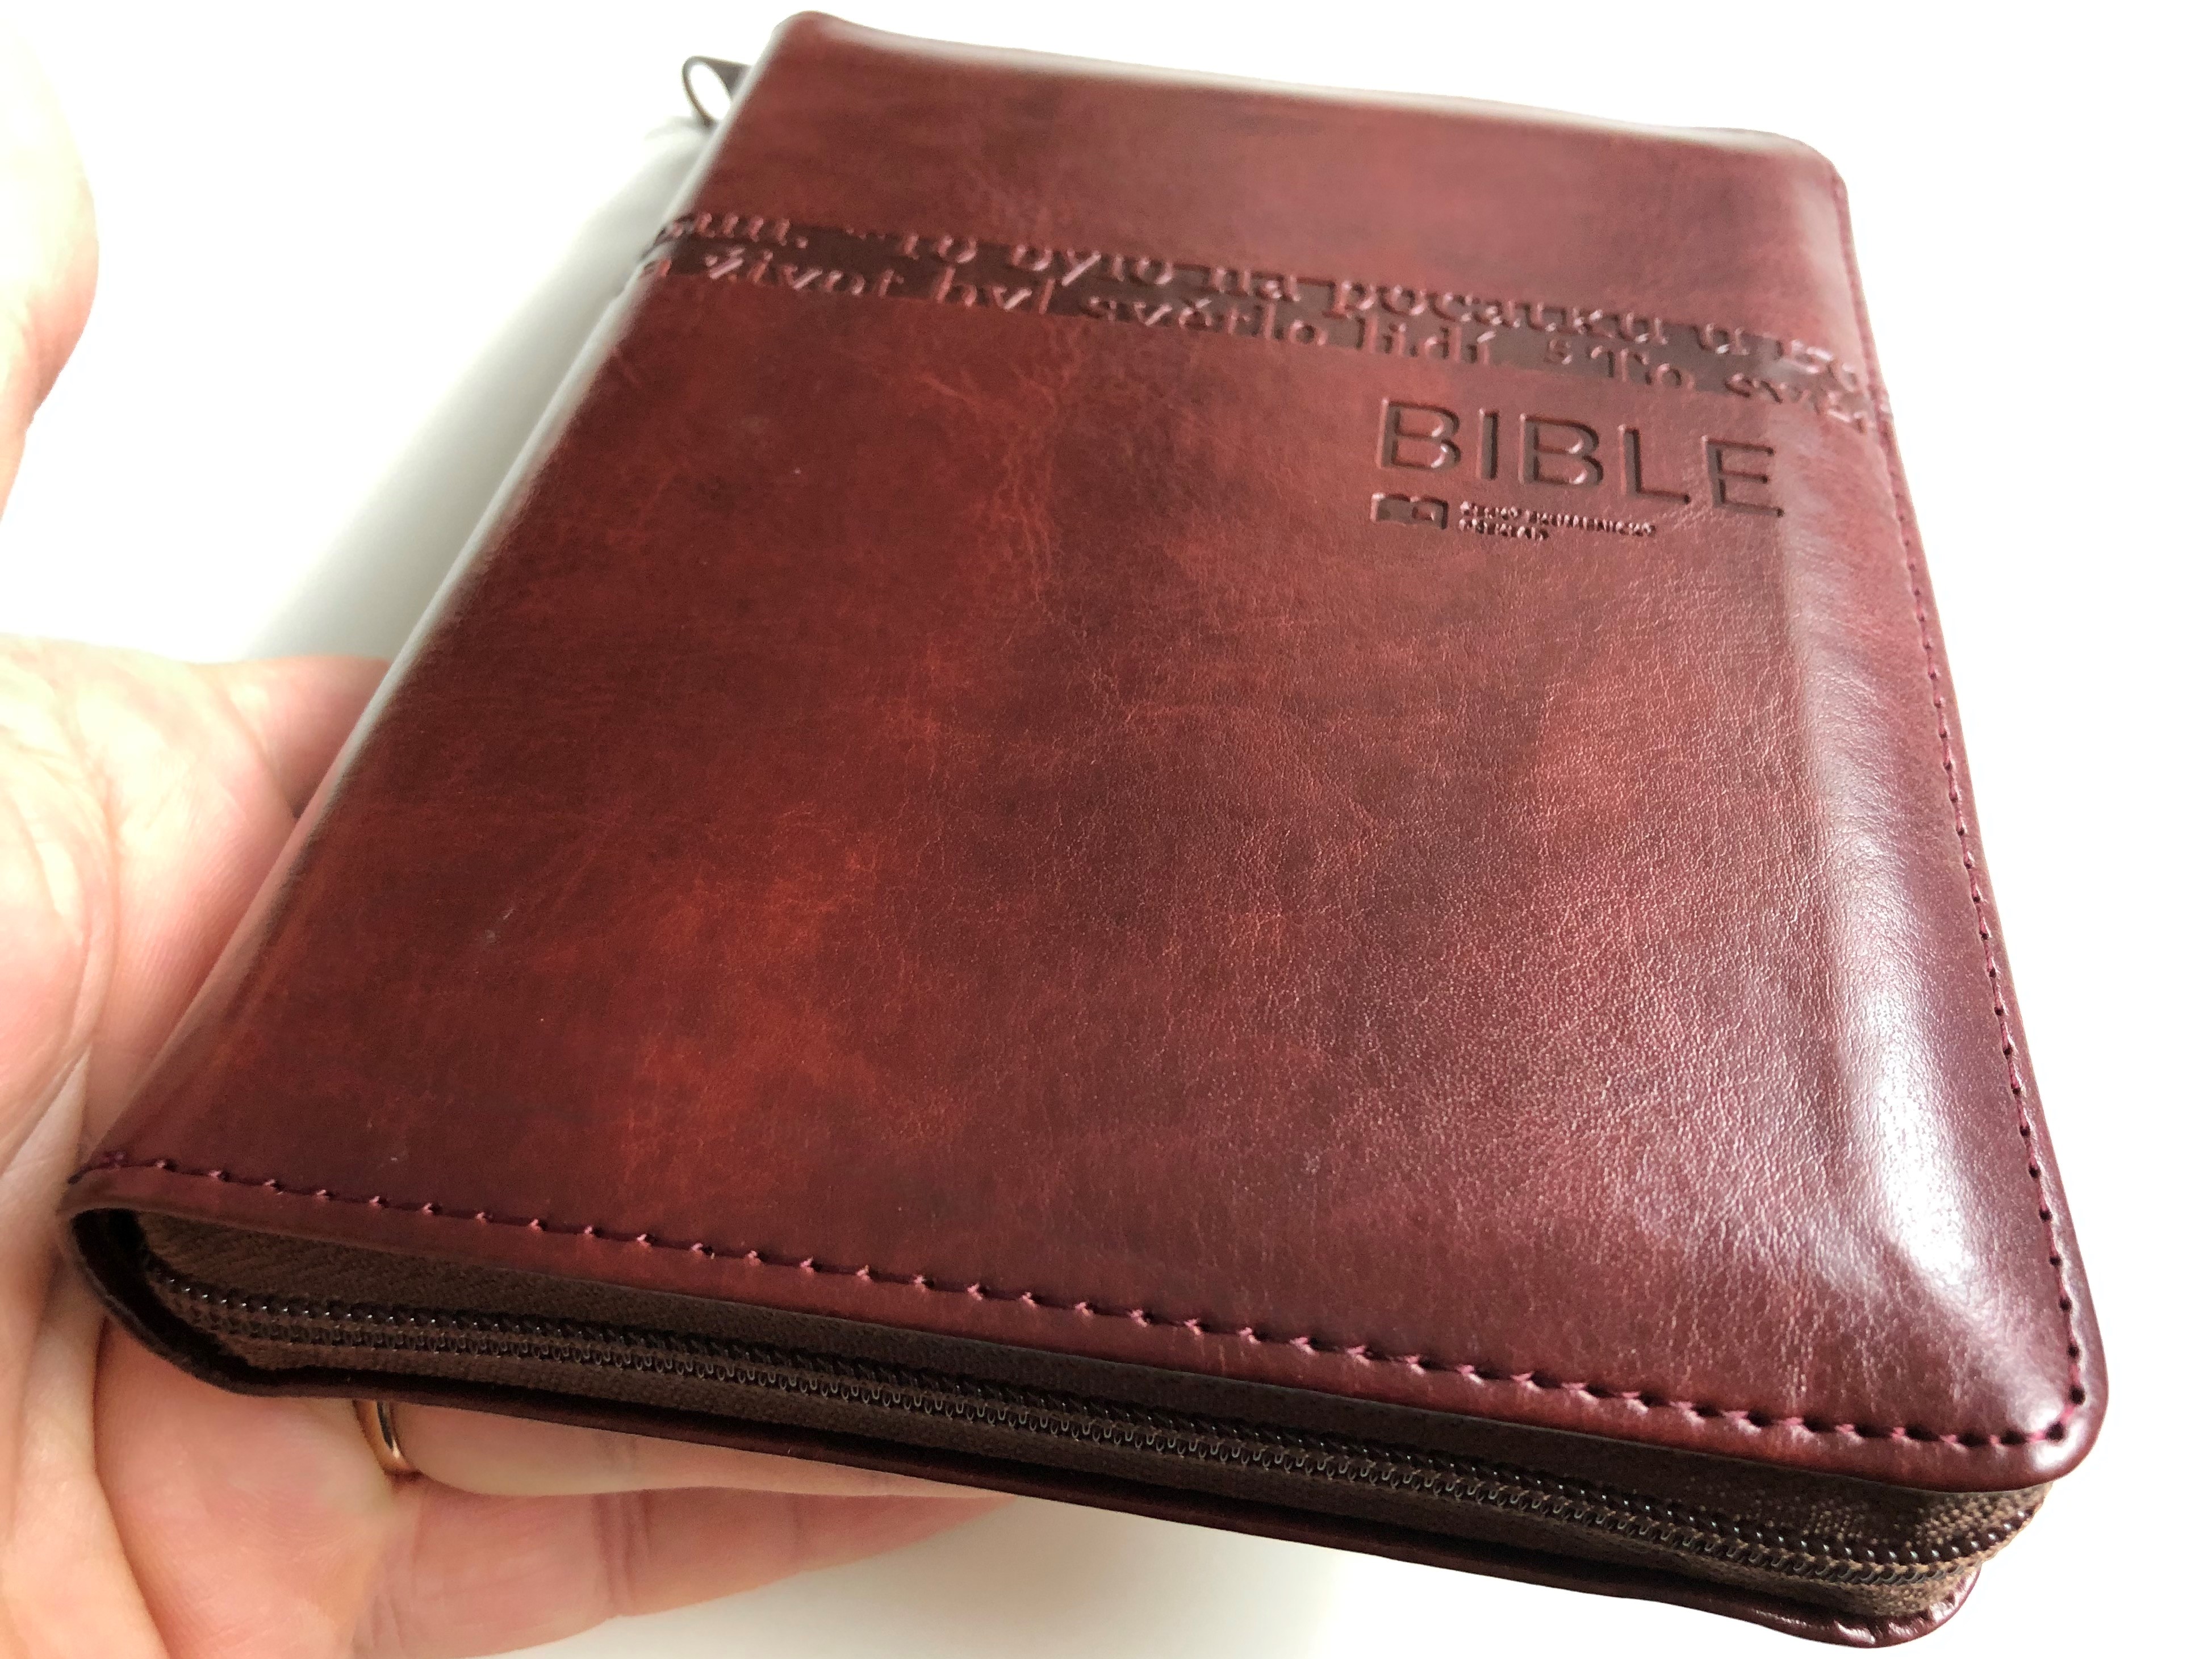 leather-bound-bible-in-czech-language-ecumenical-translation-brown-with-zipper-thumb-index-3.jpg